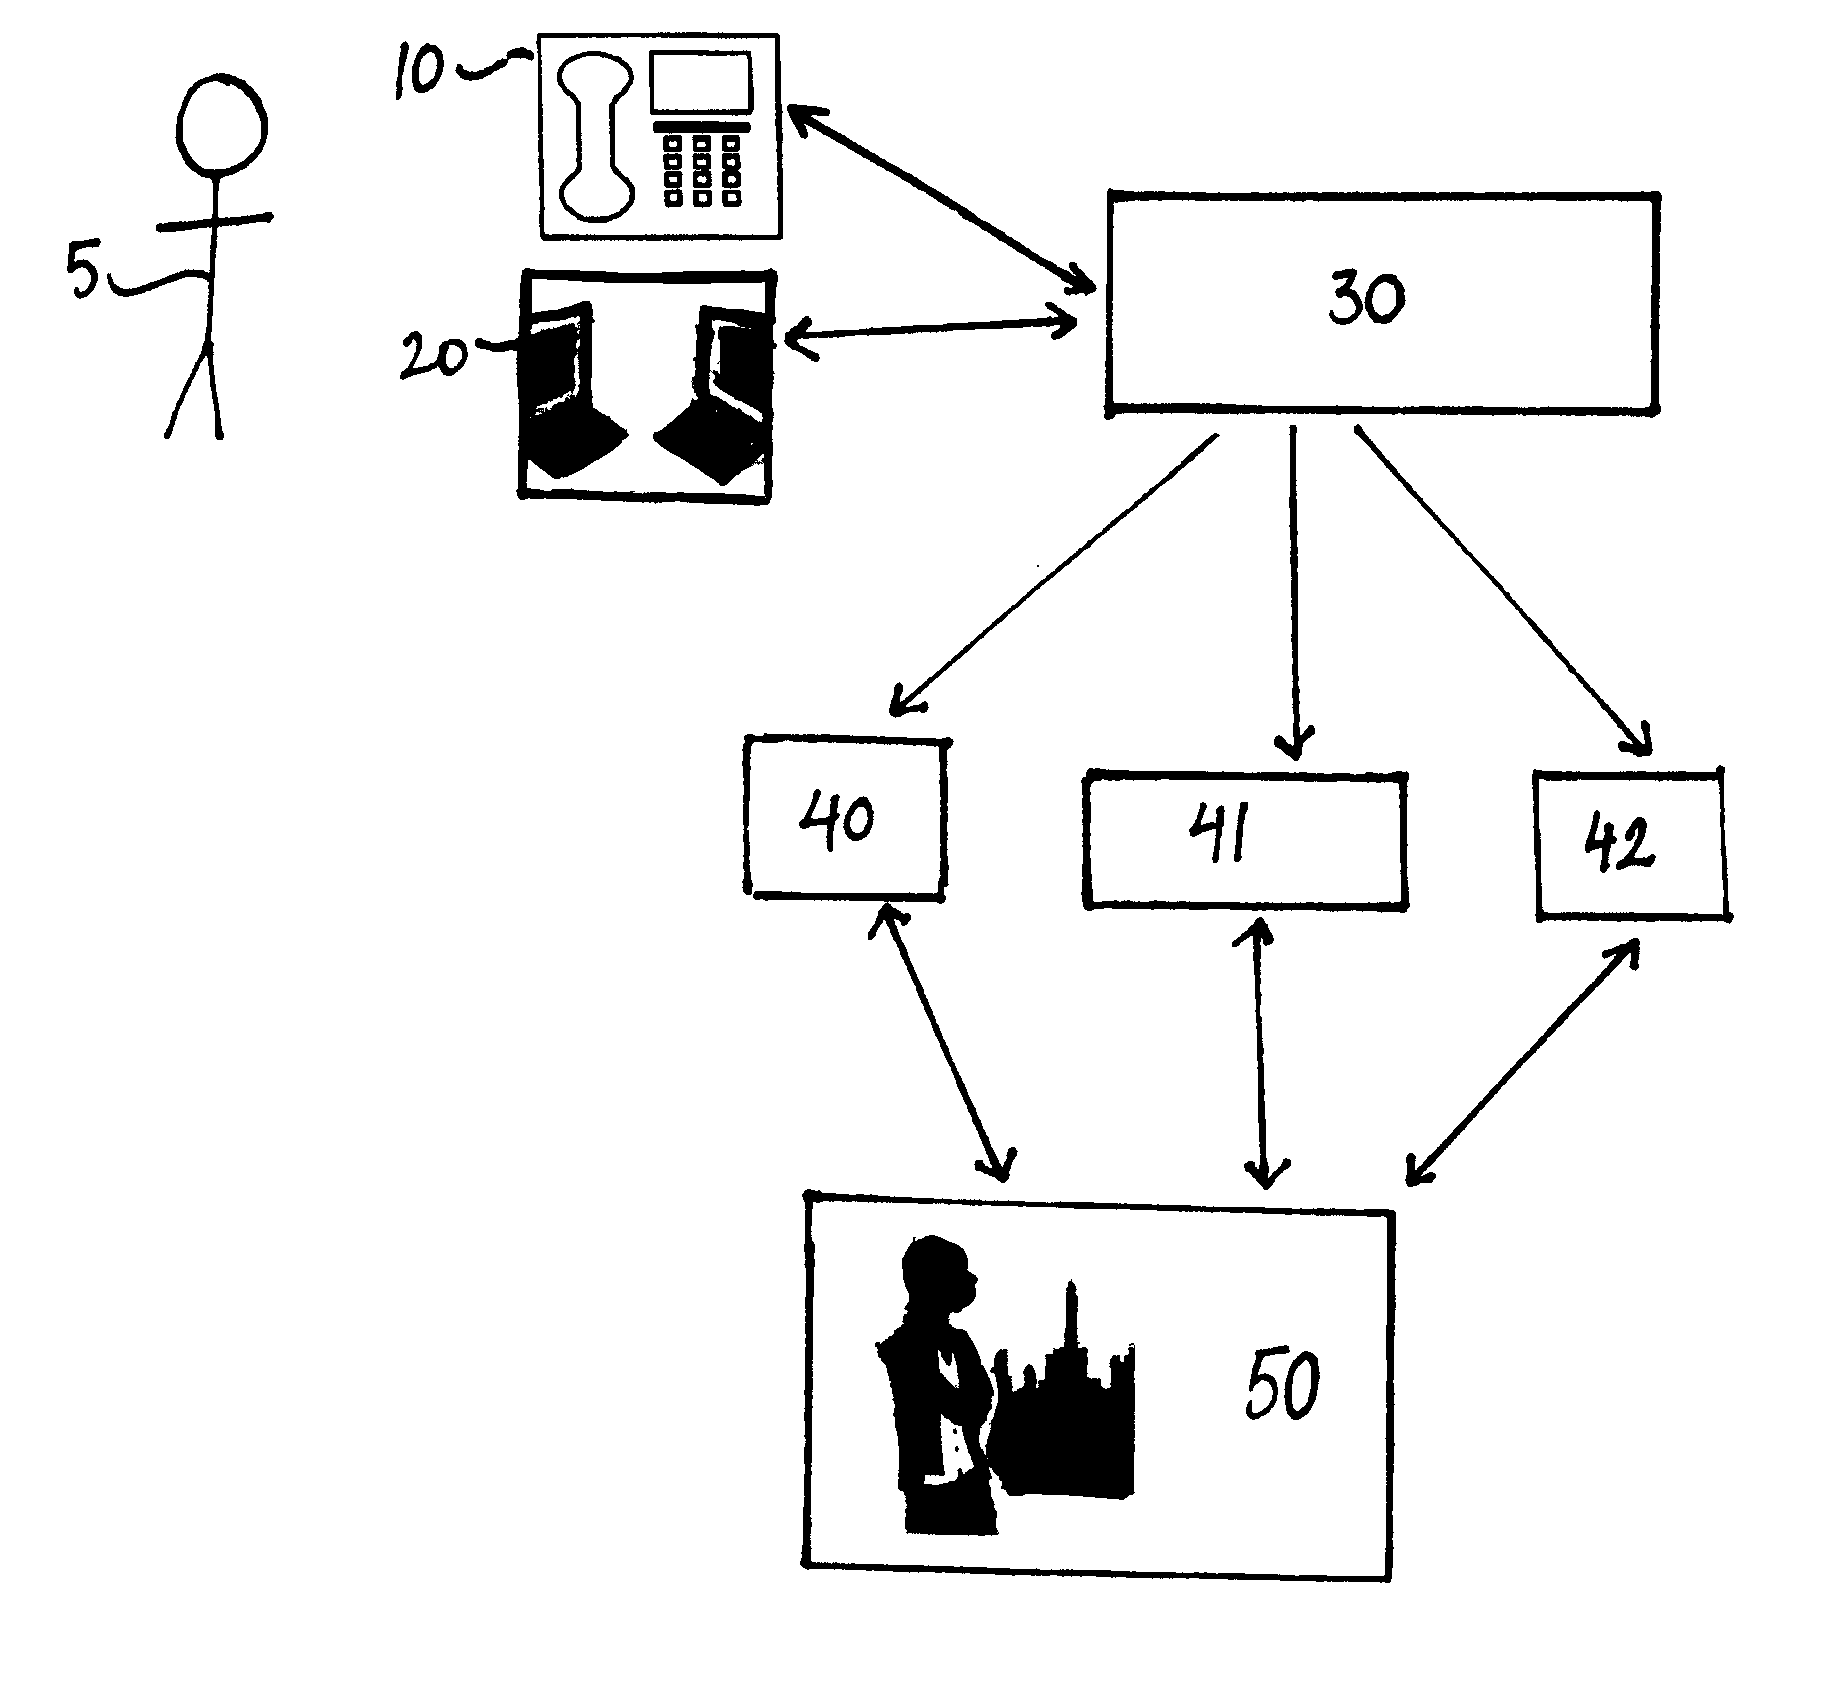 Method and process for electronically posting bulletin board messages